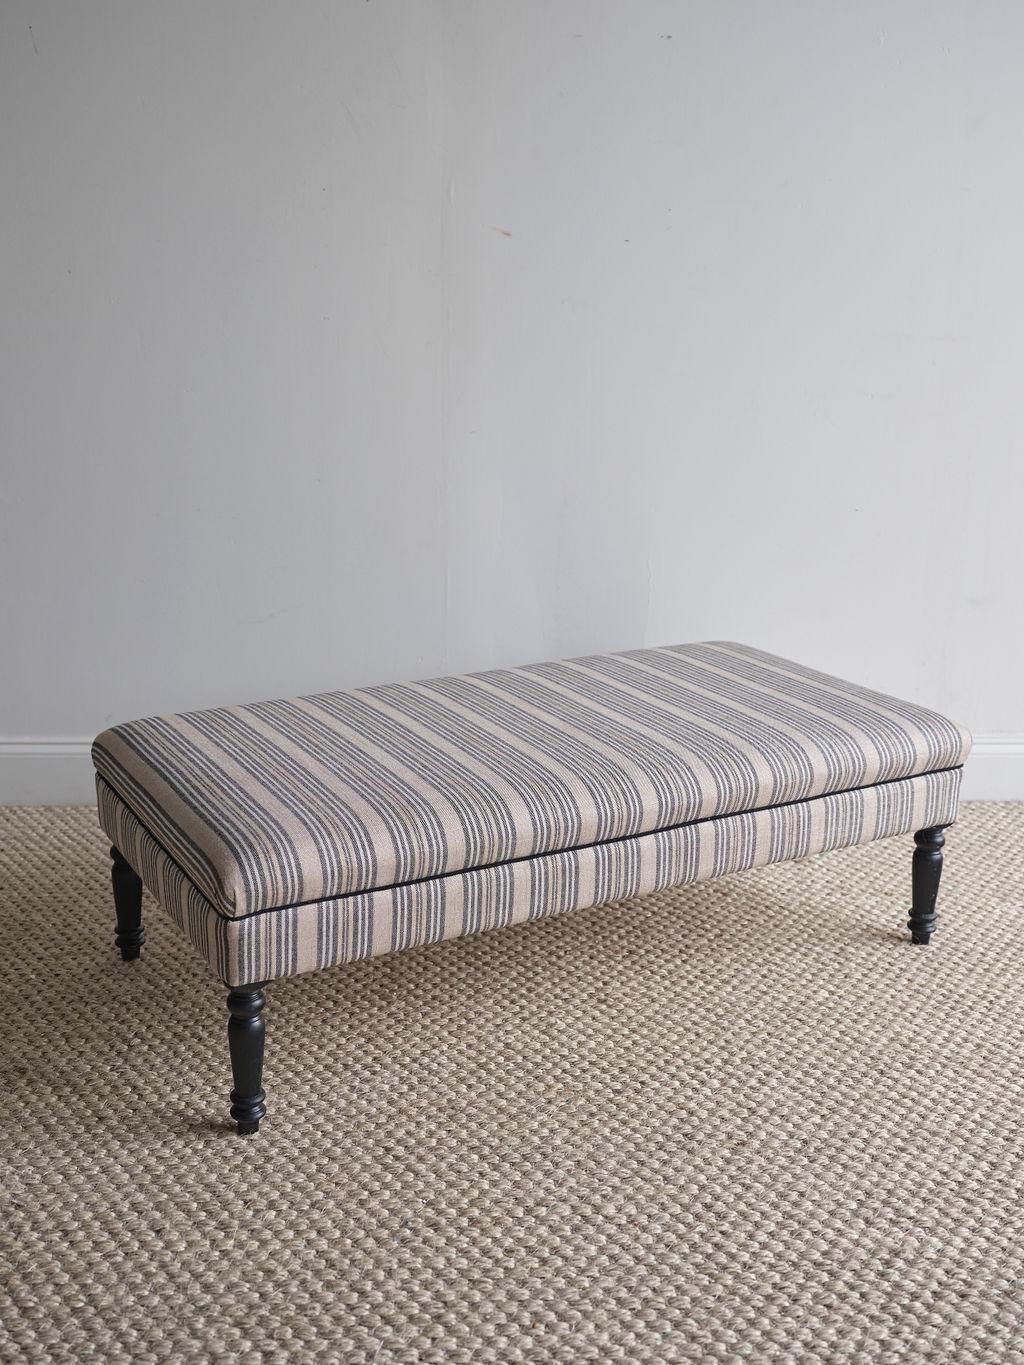 This lovely upholstered ottoman features black, white, and tan stripes and four black painted legs. It is in great shape and seems practically new, although it was built in the early 1900s. The fabric is in great condition and there are no rips or